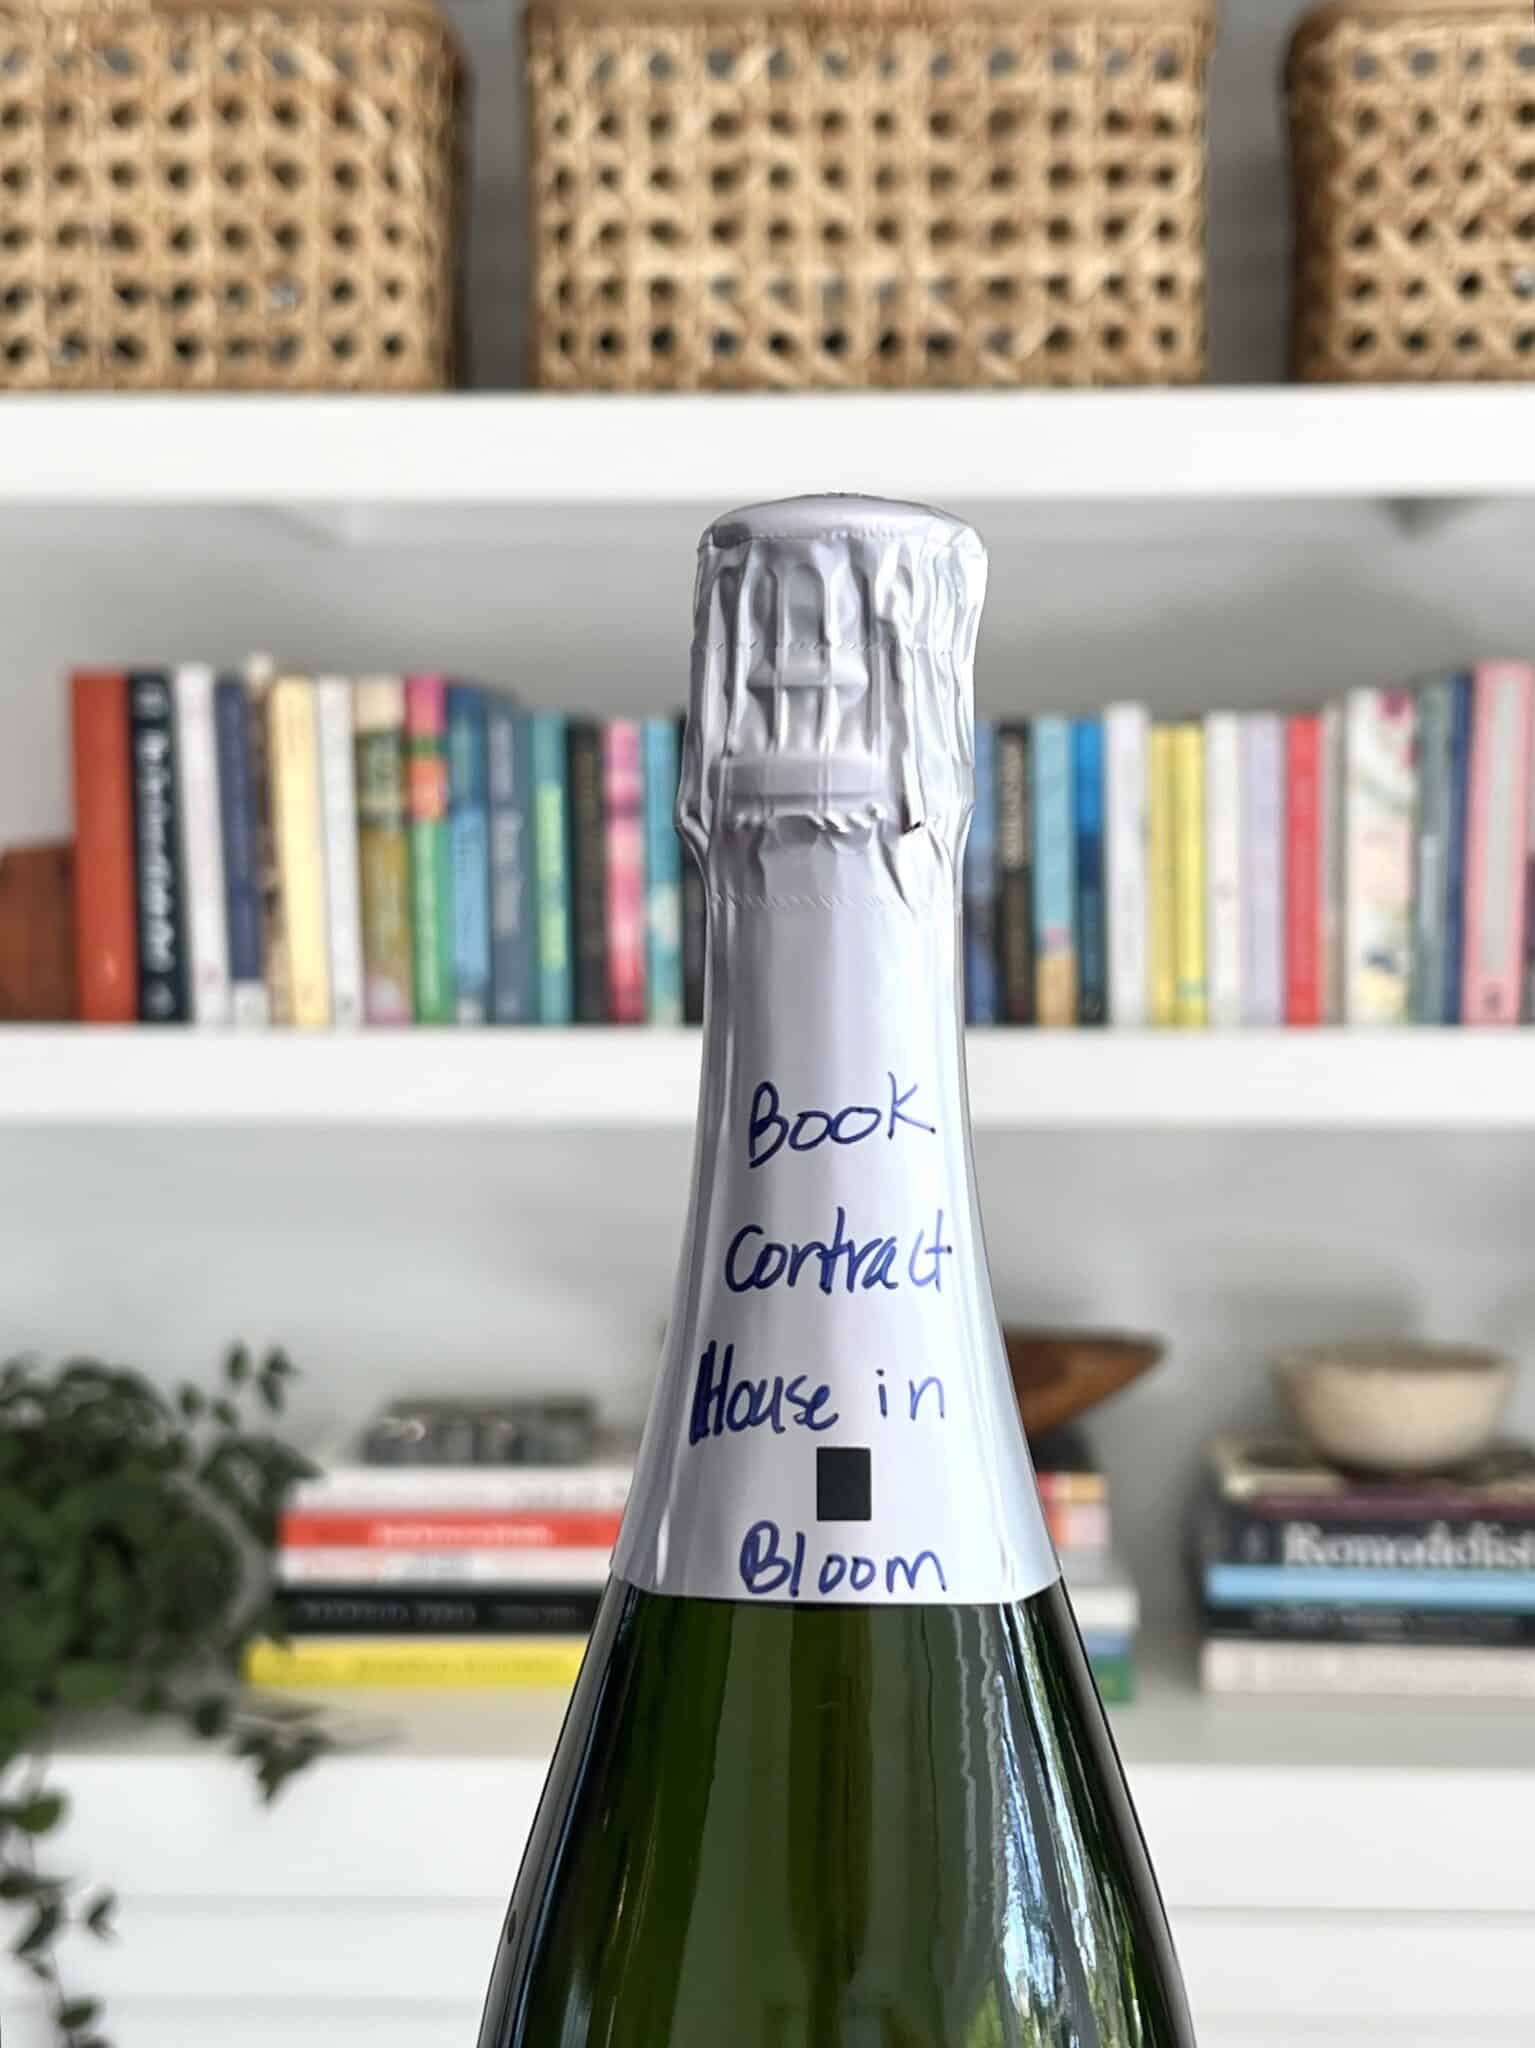  I Signed My First Book Contract. Jennifer O'Brien House in Bloom. I wrote this goal on a bottle of champagne.